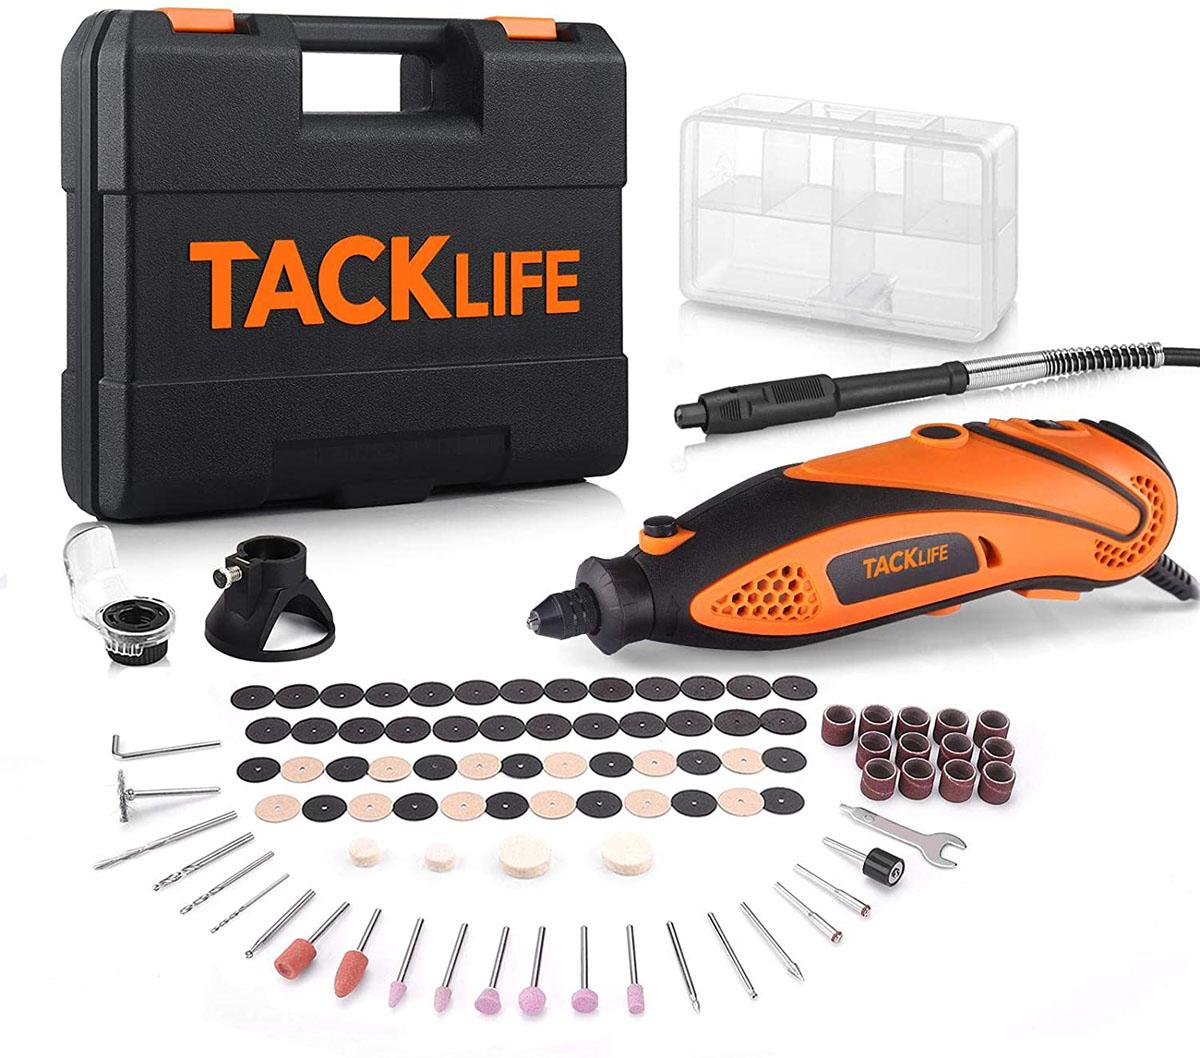 Tacklife Rotary Tool Kit with MultiPro Keyless Chuck for $25.26 Shipped